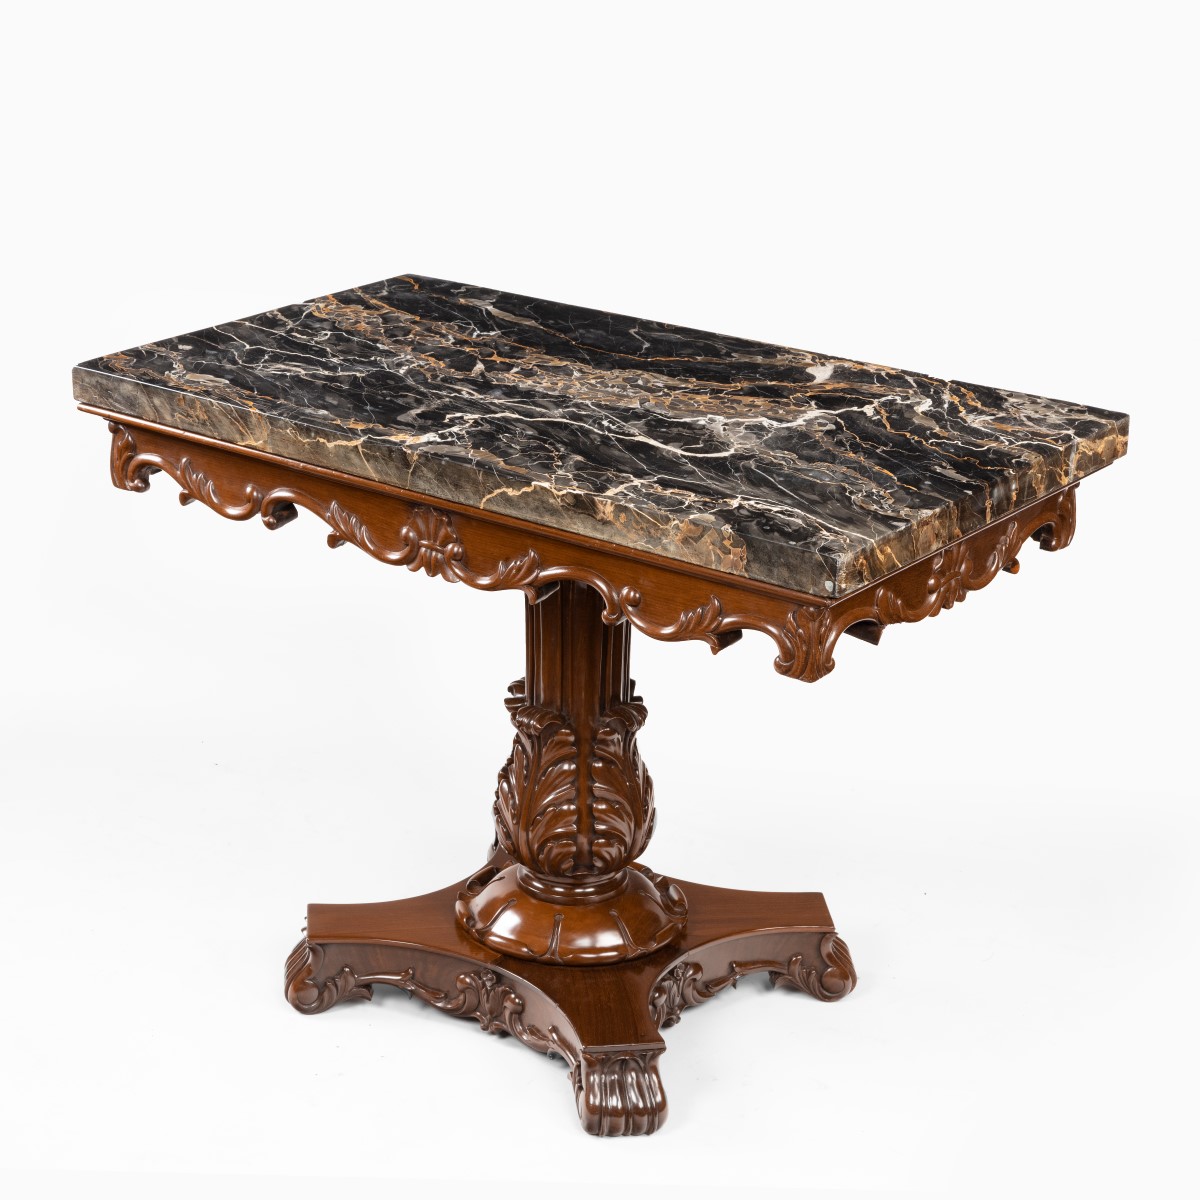 Anglo-Indian mahogany table with Nero portoro marble top by White and Co Calcutta, all on an X-shaped base with scroll feet, stamped ‘White and Co Calcutta’. Indian, circa 1840.